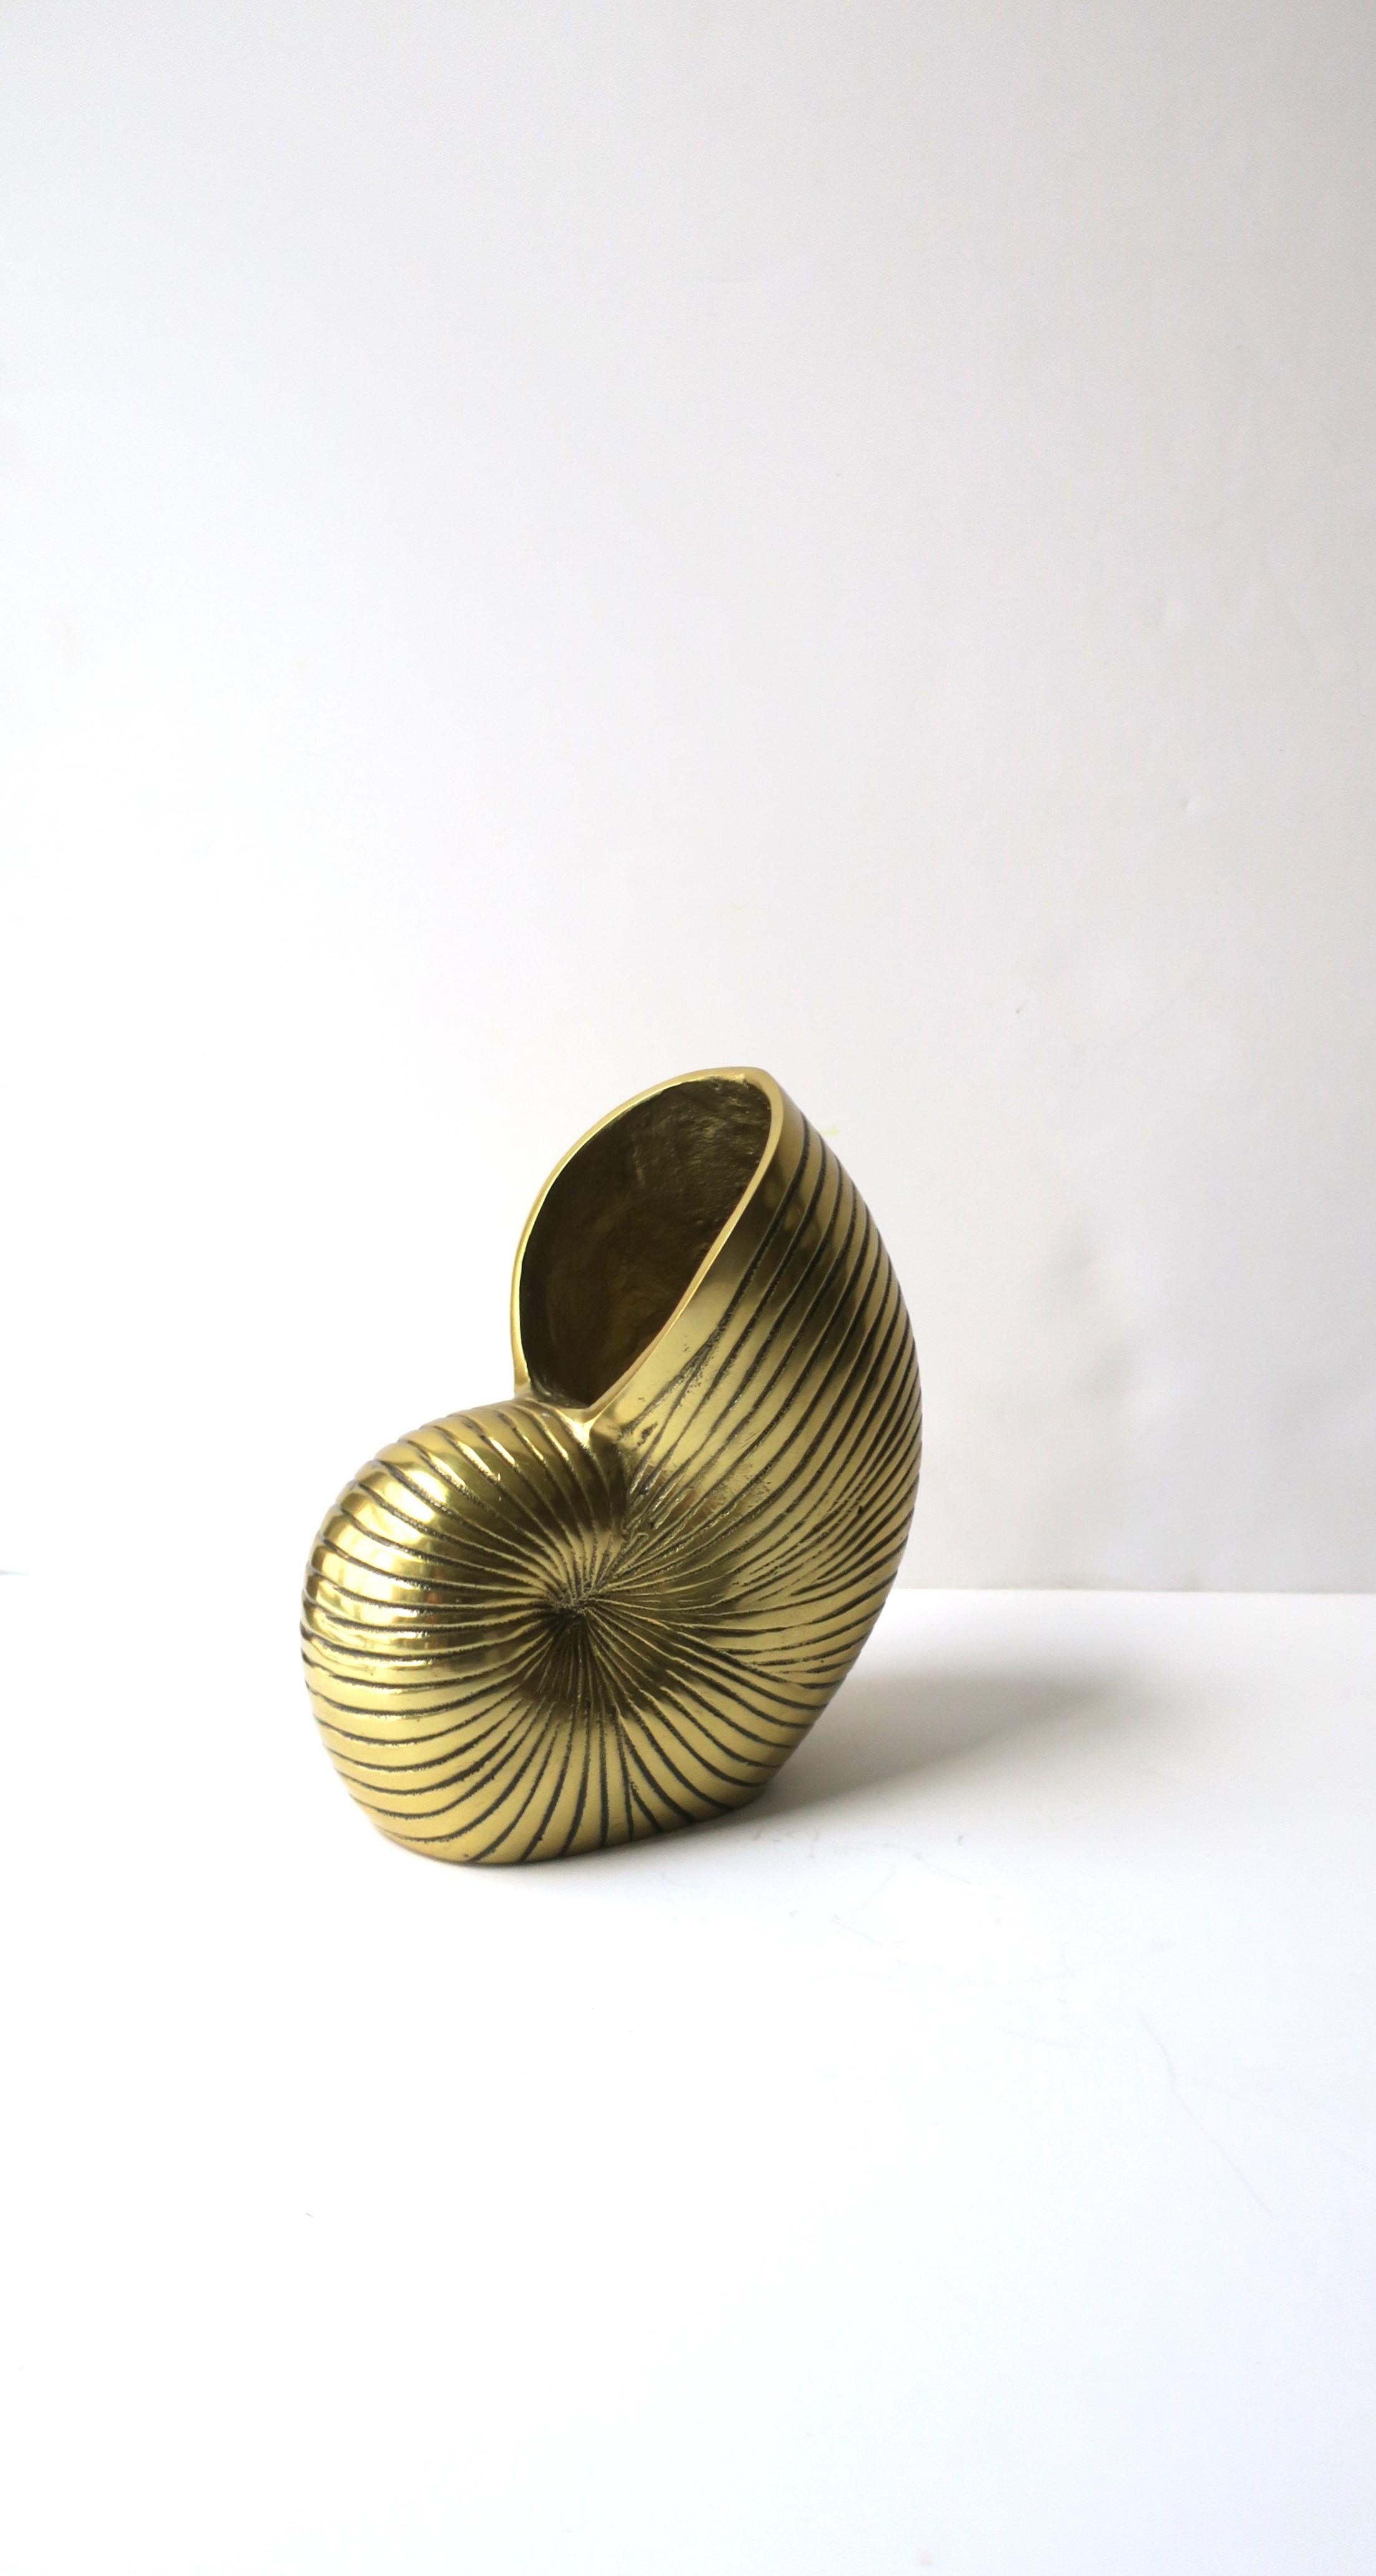 Brass Nautilus Seashell Vase, Planter, or Decorative Object For Sale 1